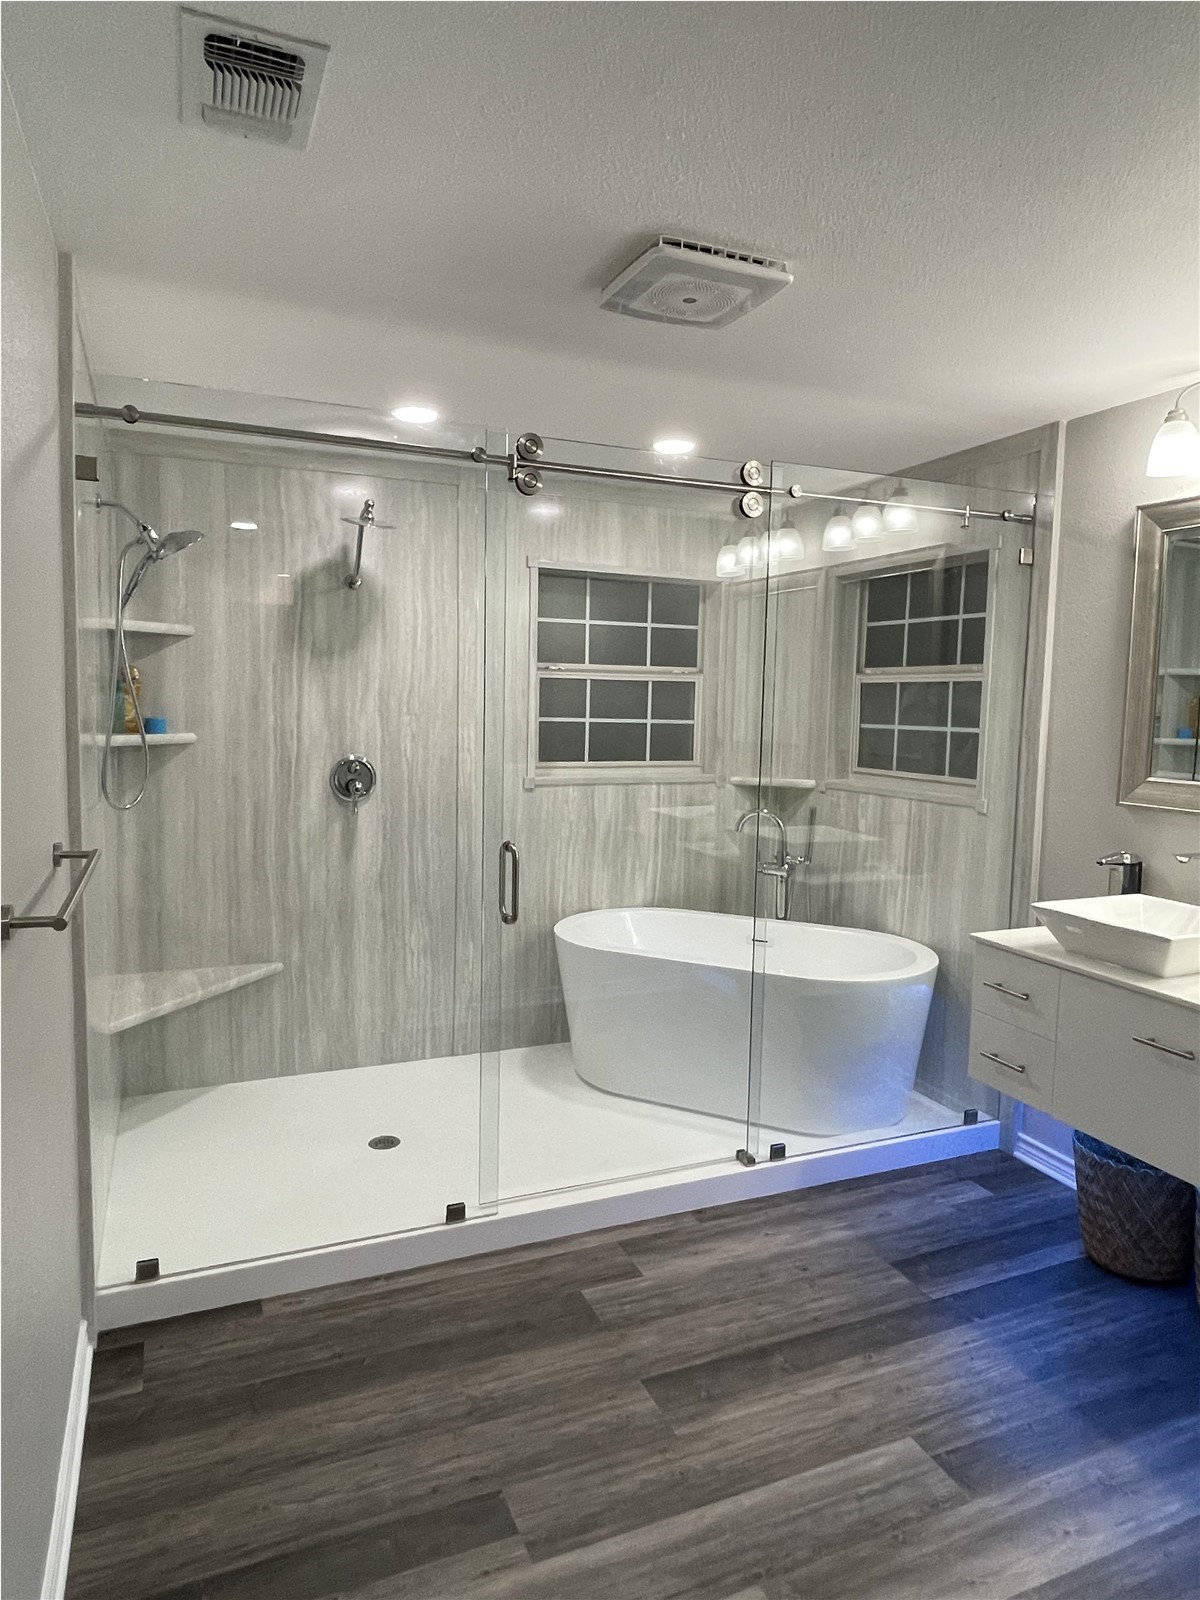 Is Your Dated Bathroom in Need of a Remodel?